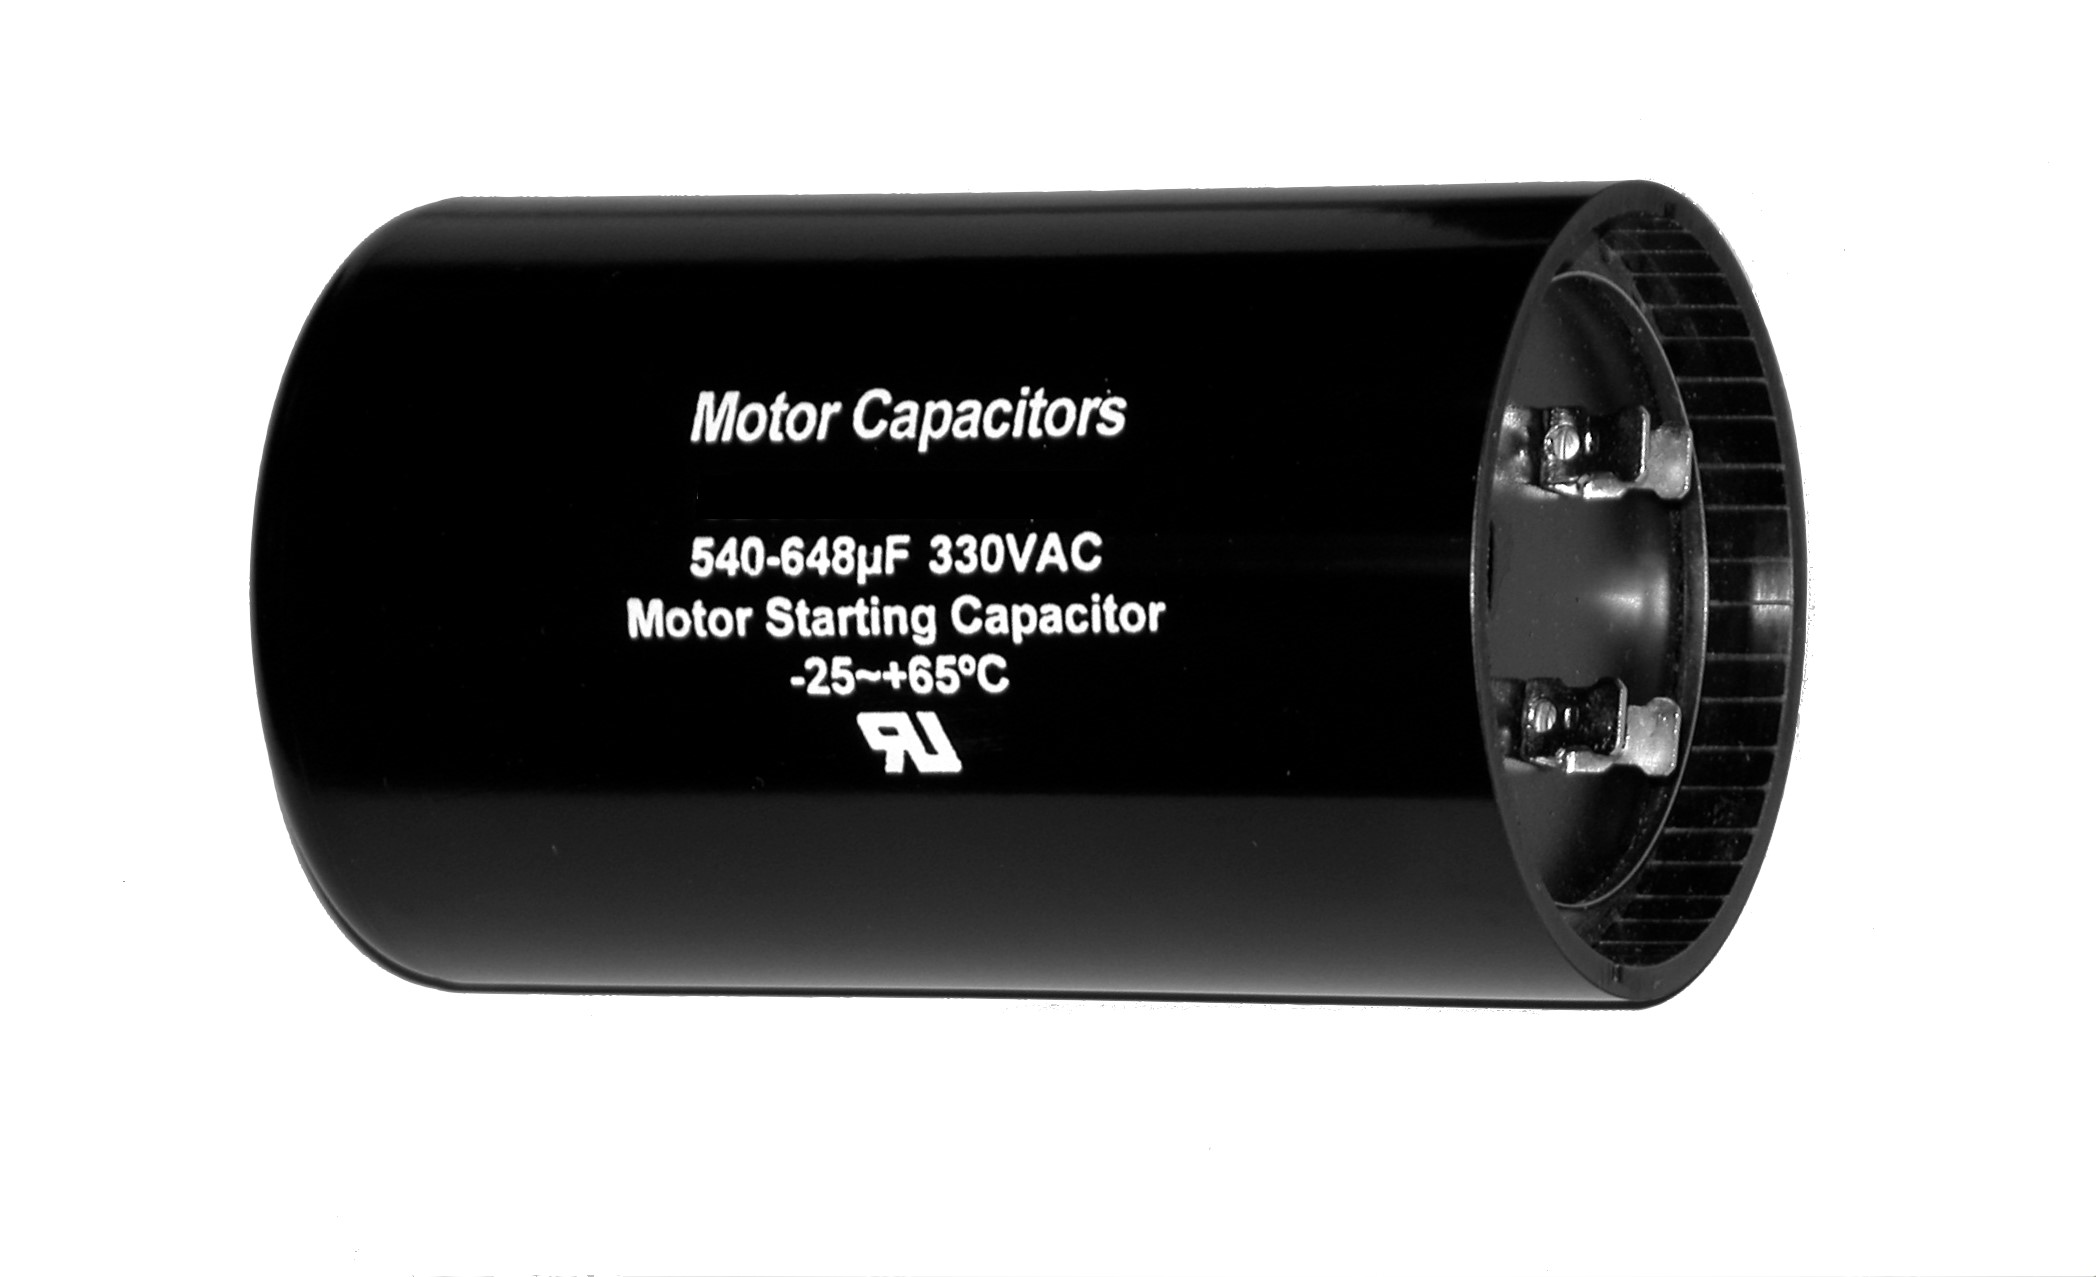 What Is An Electric Motor Capacitor?